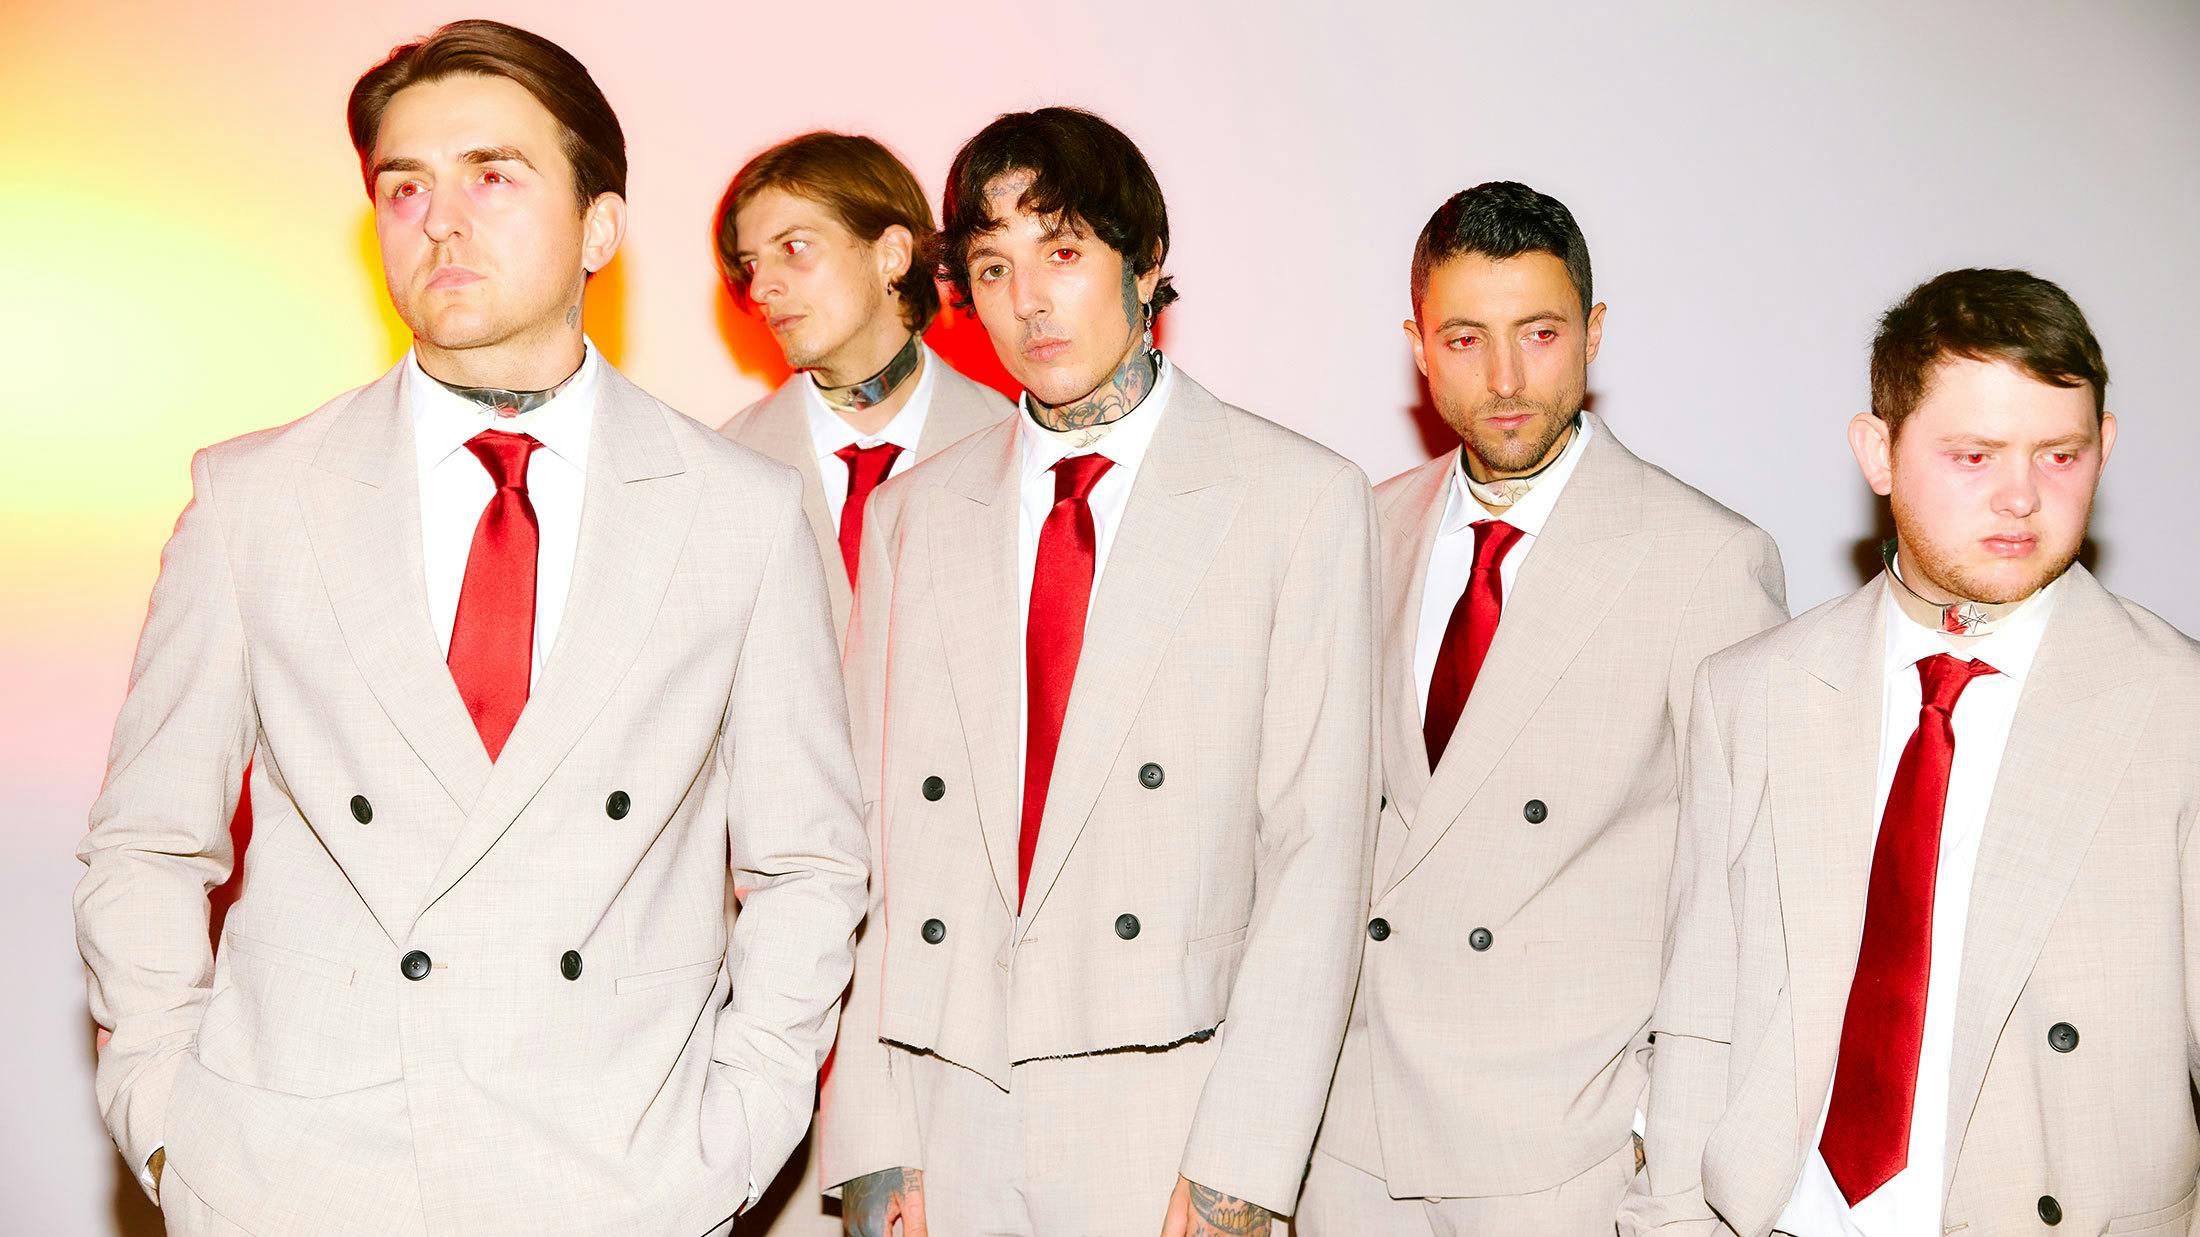 Bring Me The Horizon plan to release a new song “pretty soon”